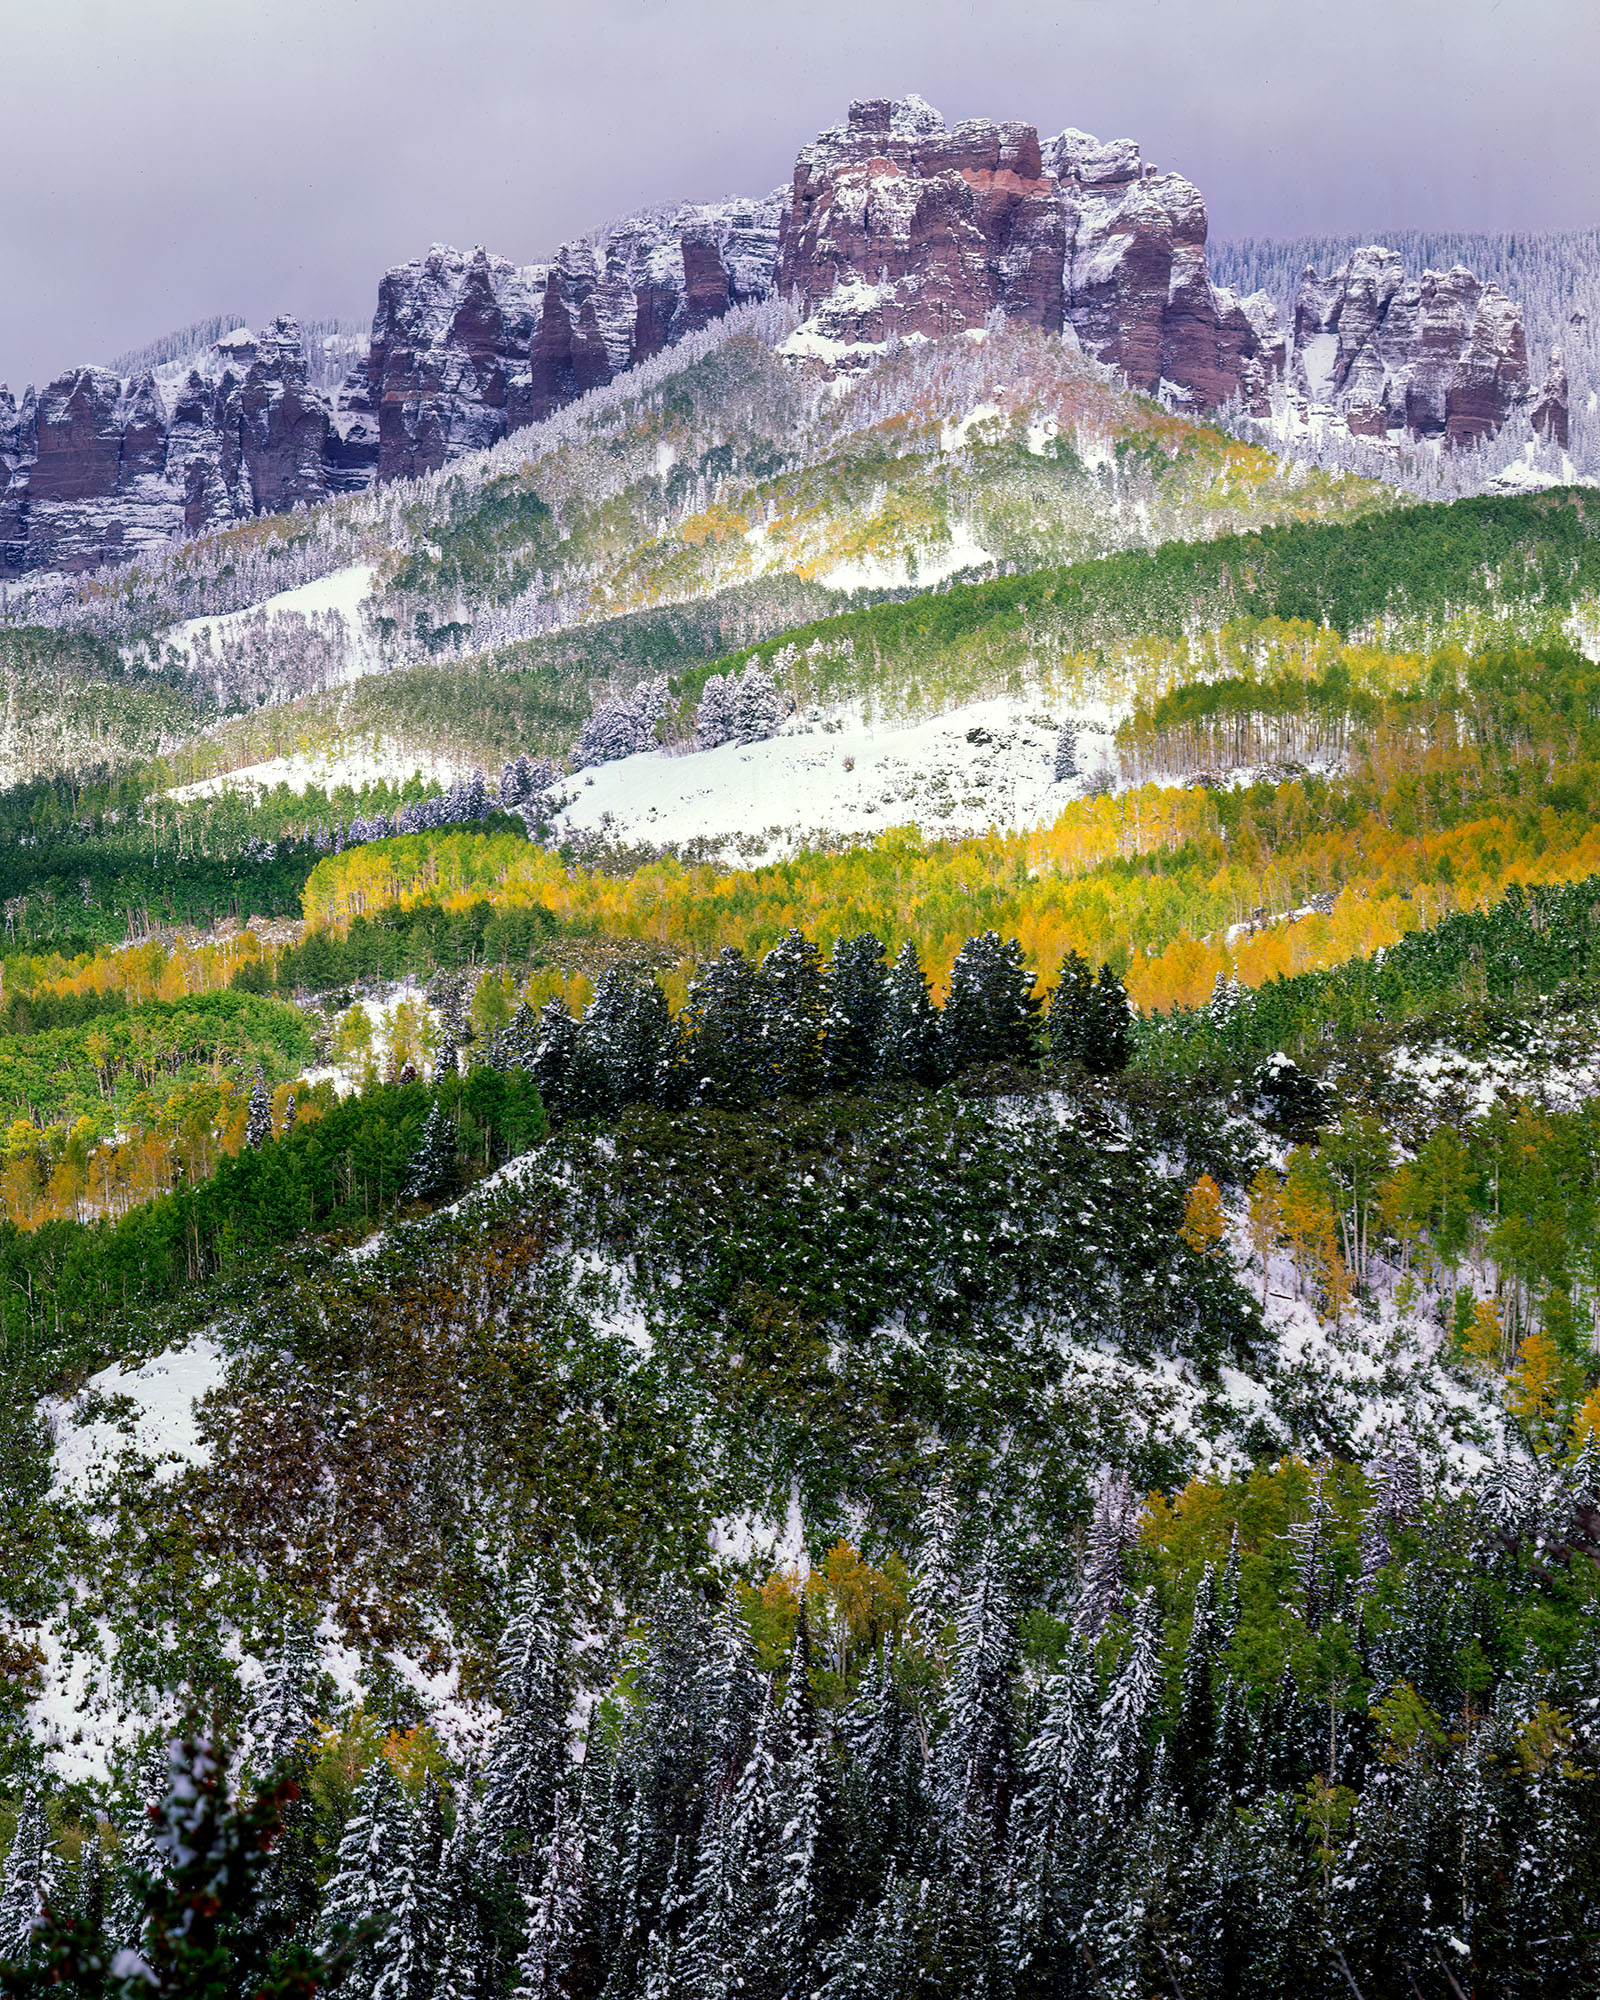 This vertical image captures the enchanting scene of a snowy autumn day along Owl Creek Basin in Colorado. The frame is filled...